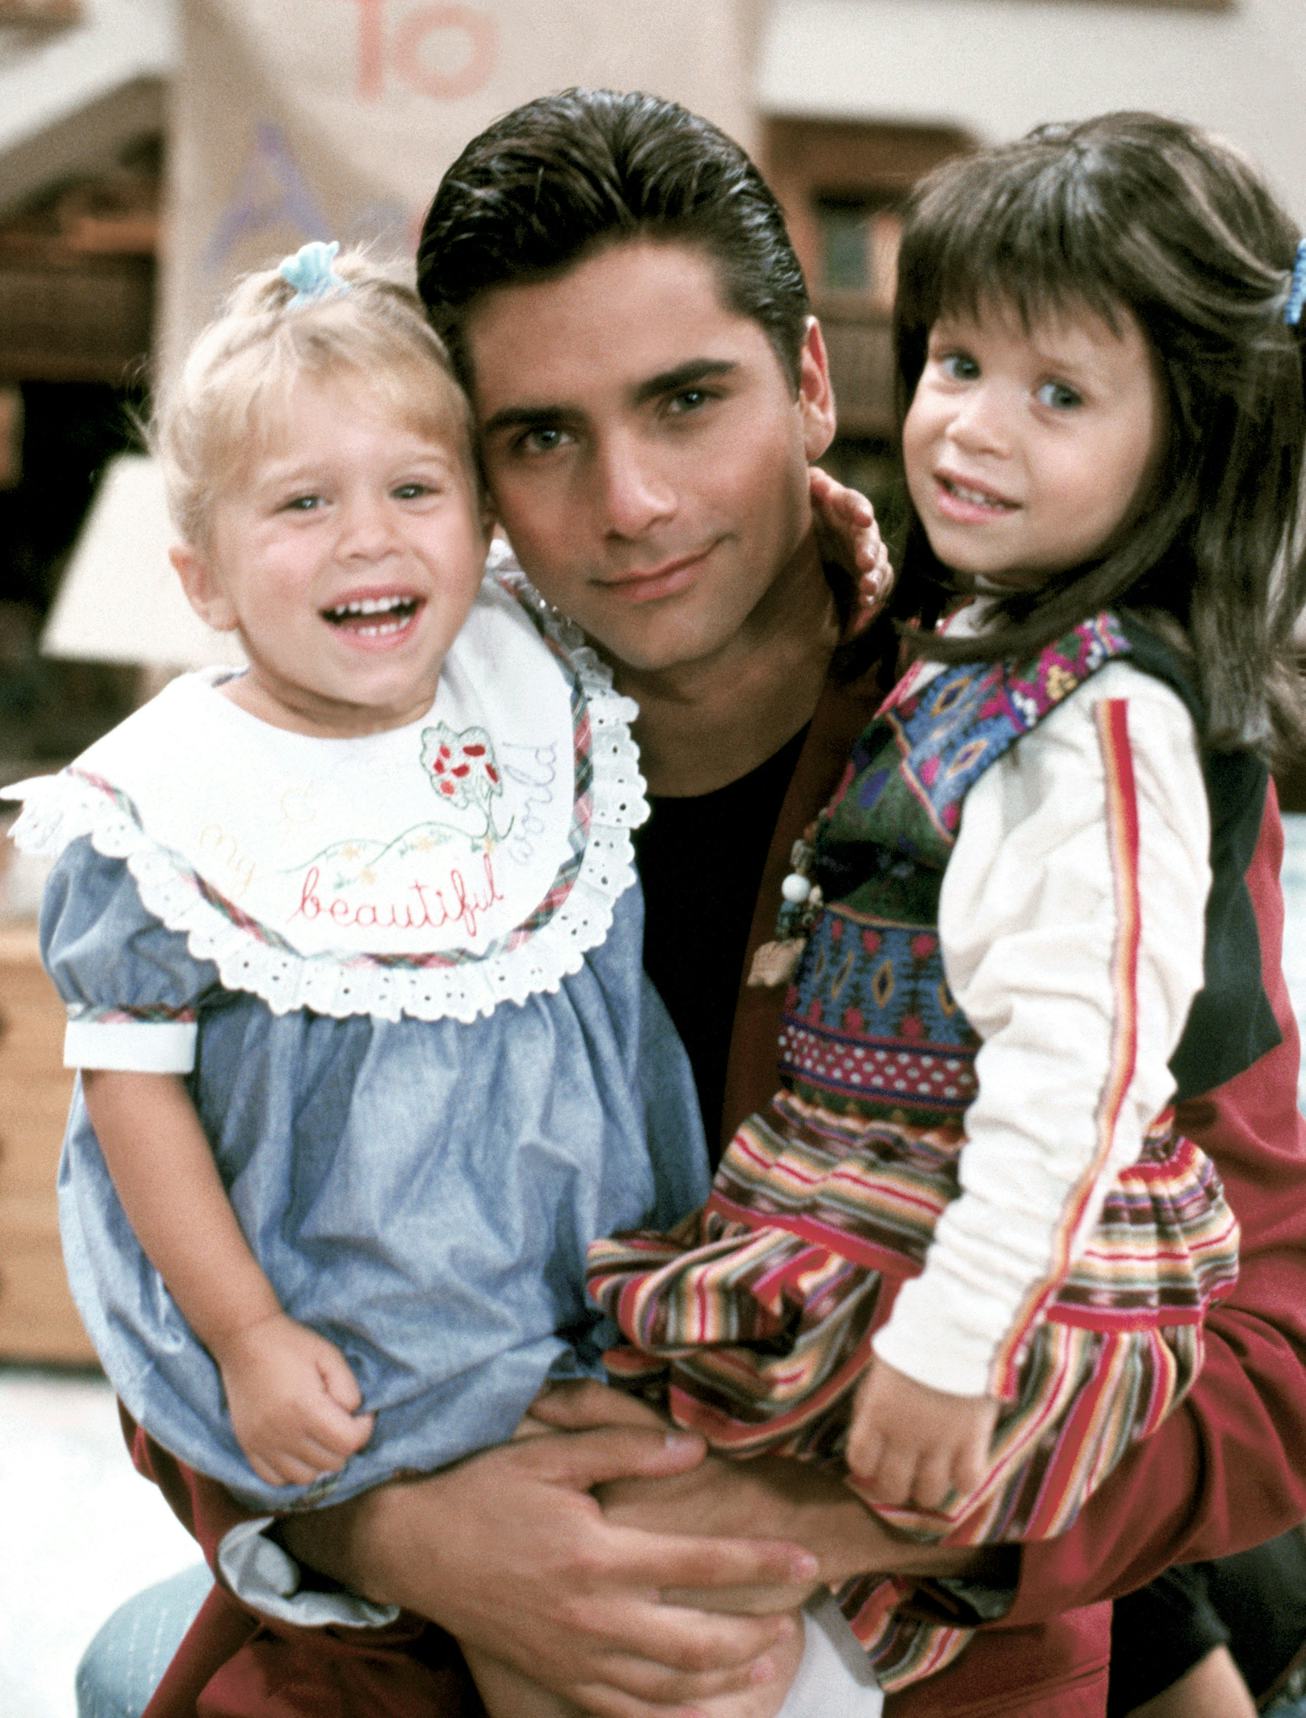 John Stamos Had The Olsen Twins Fired From Full House